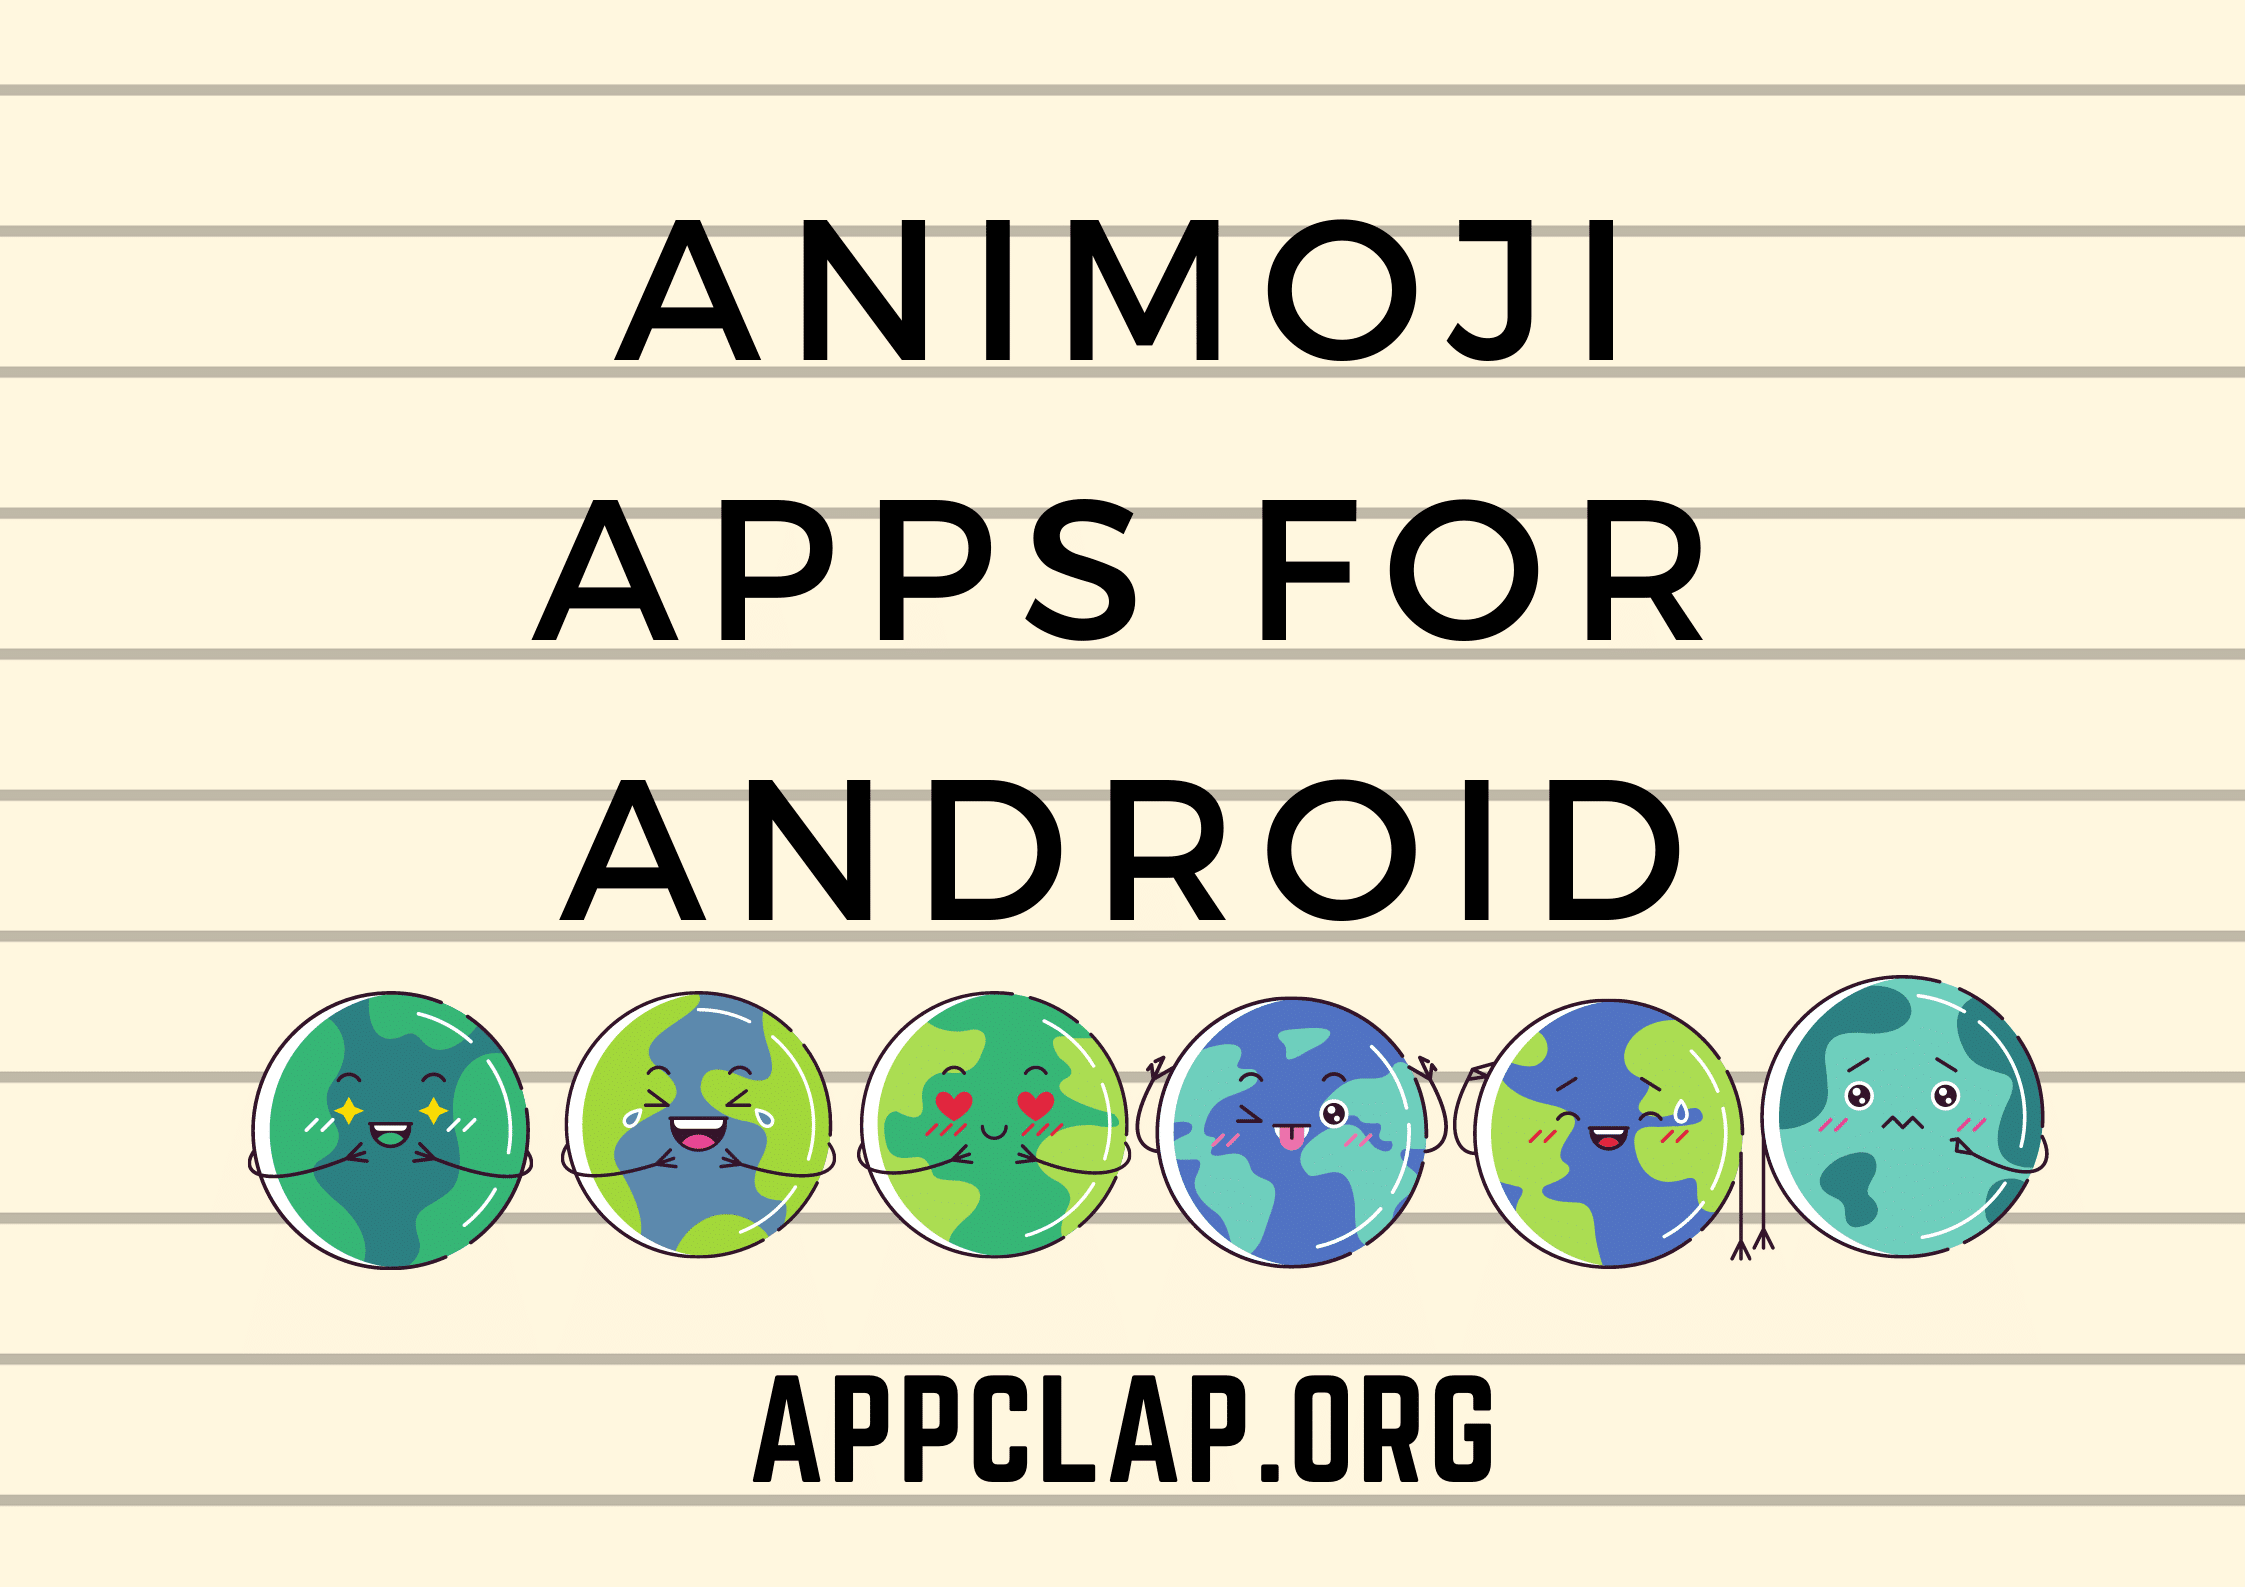 Animoji Apps for Android